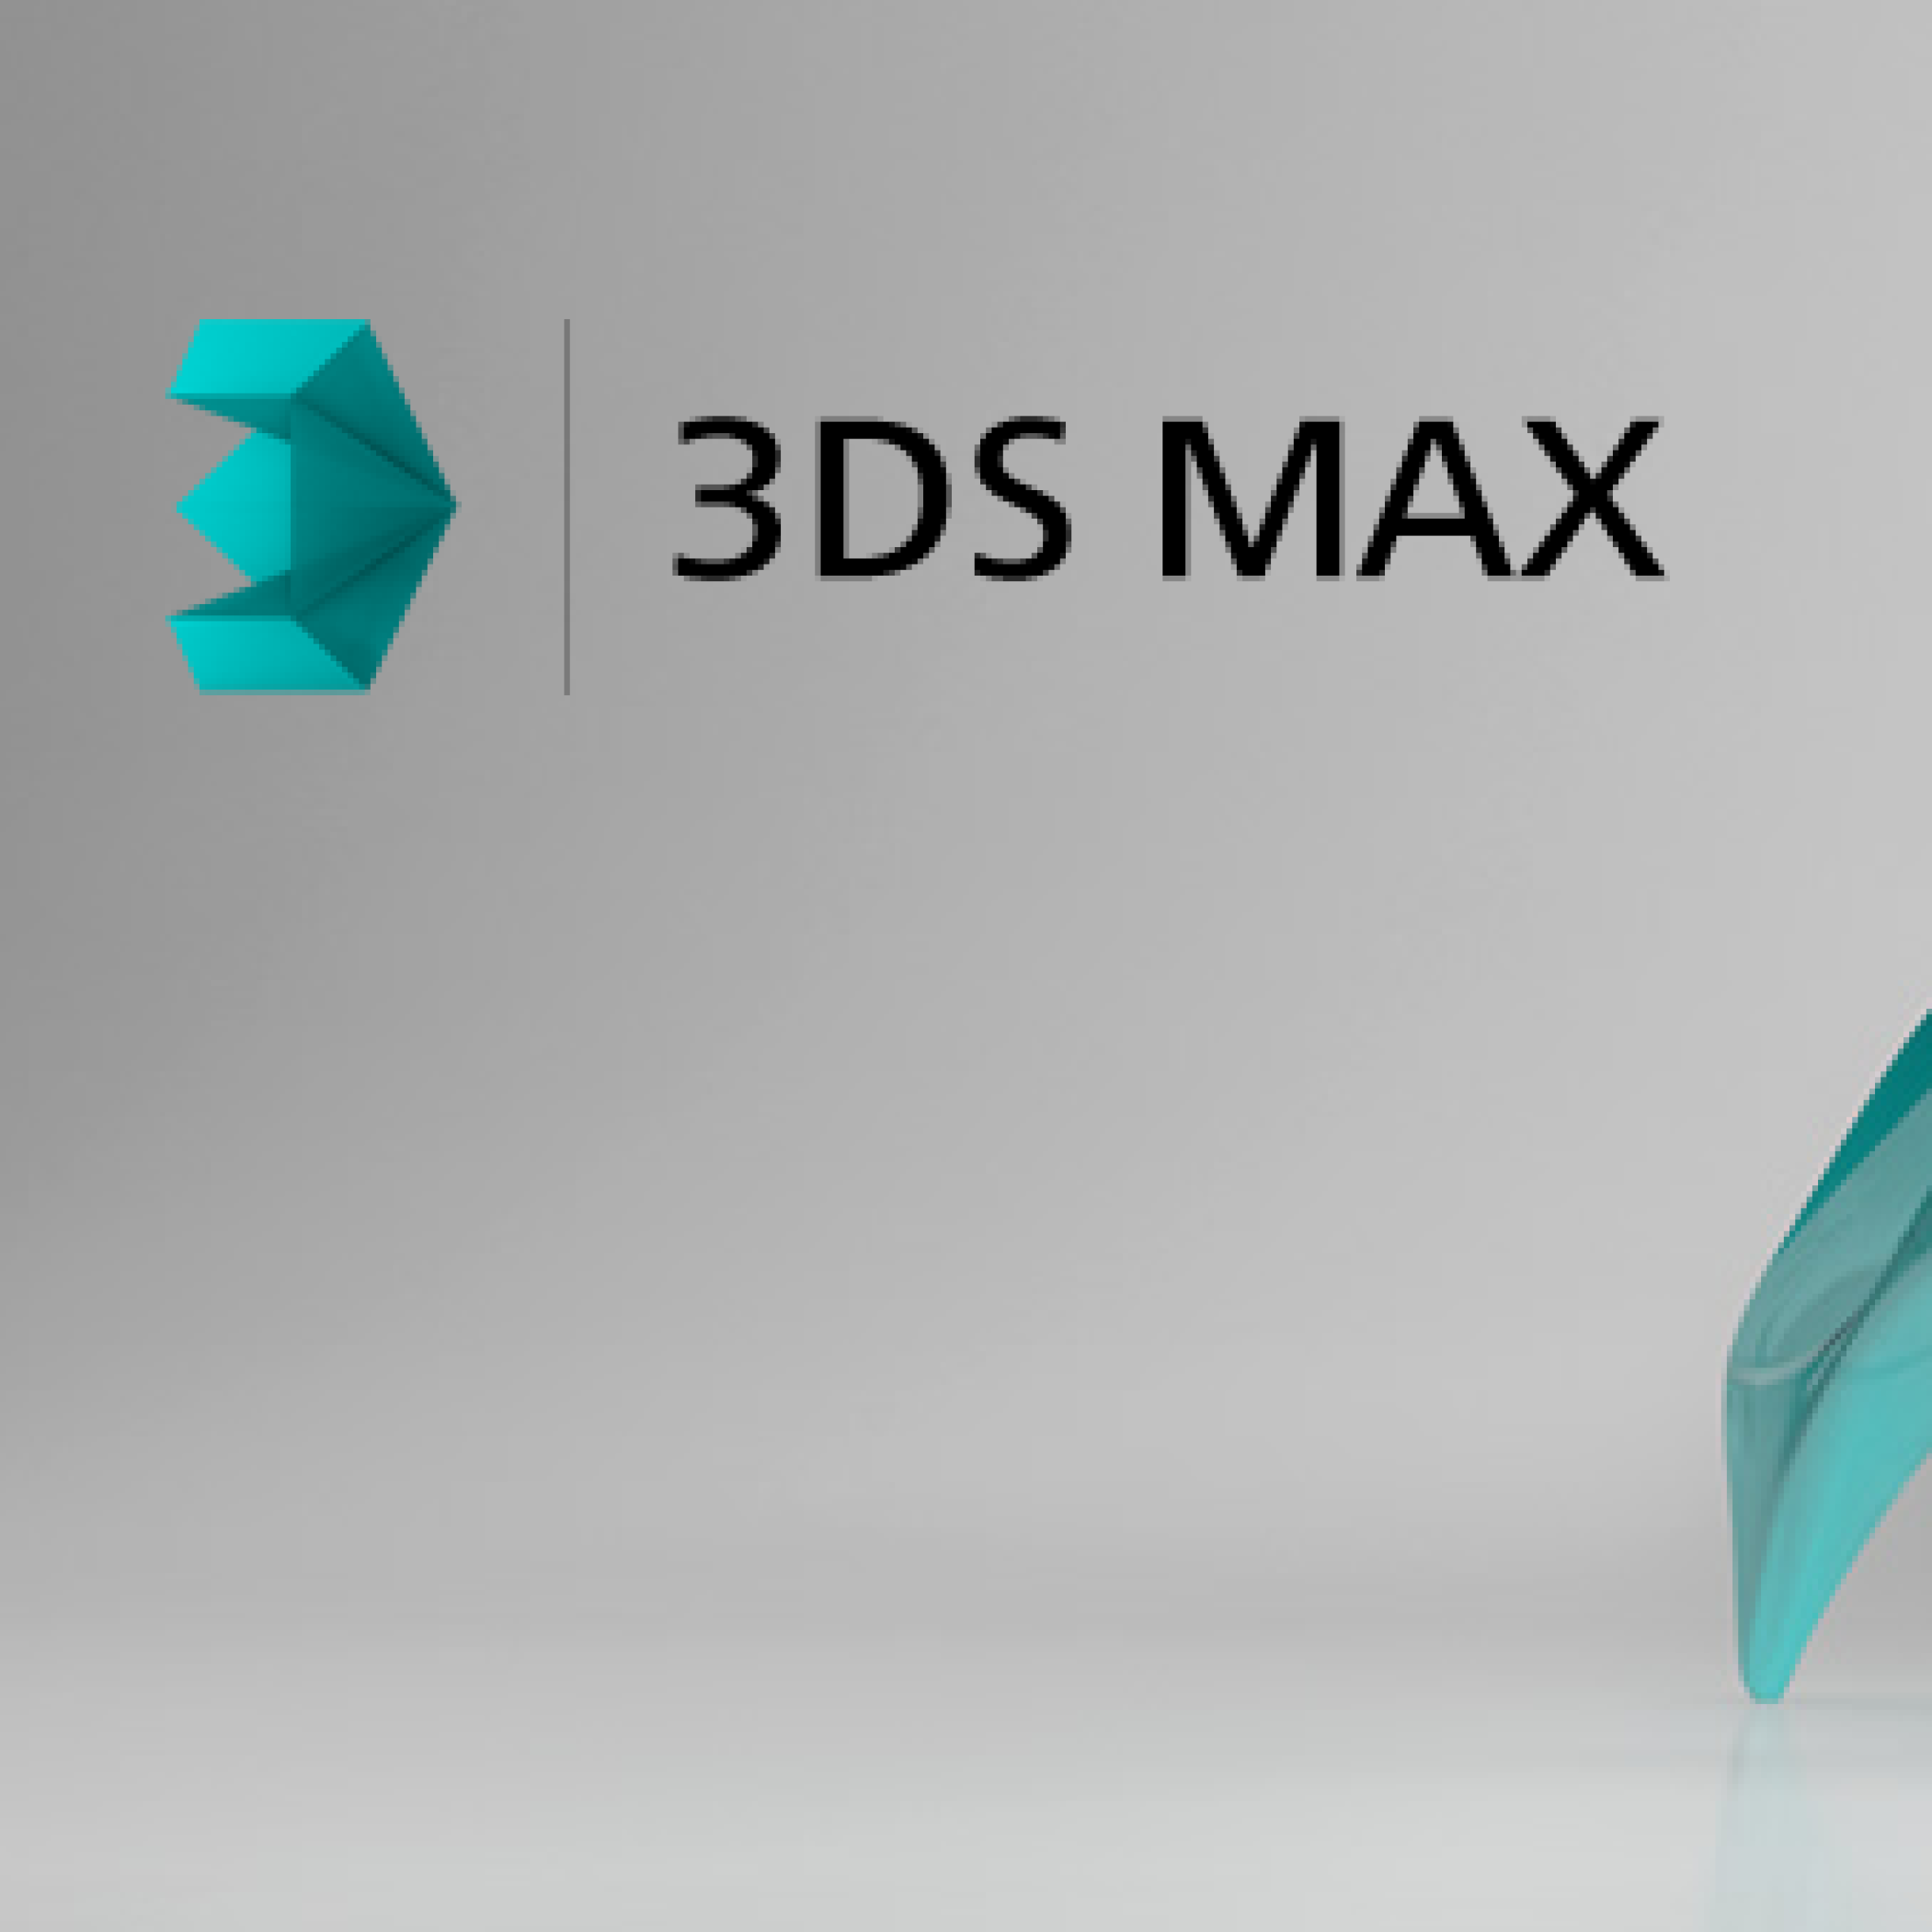 3ds max 2016 download